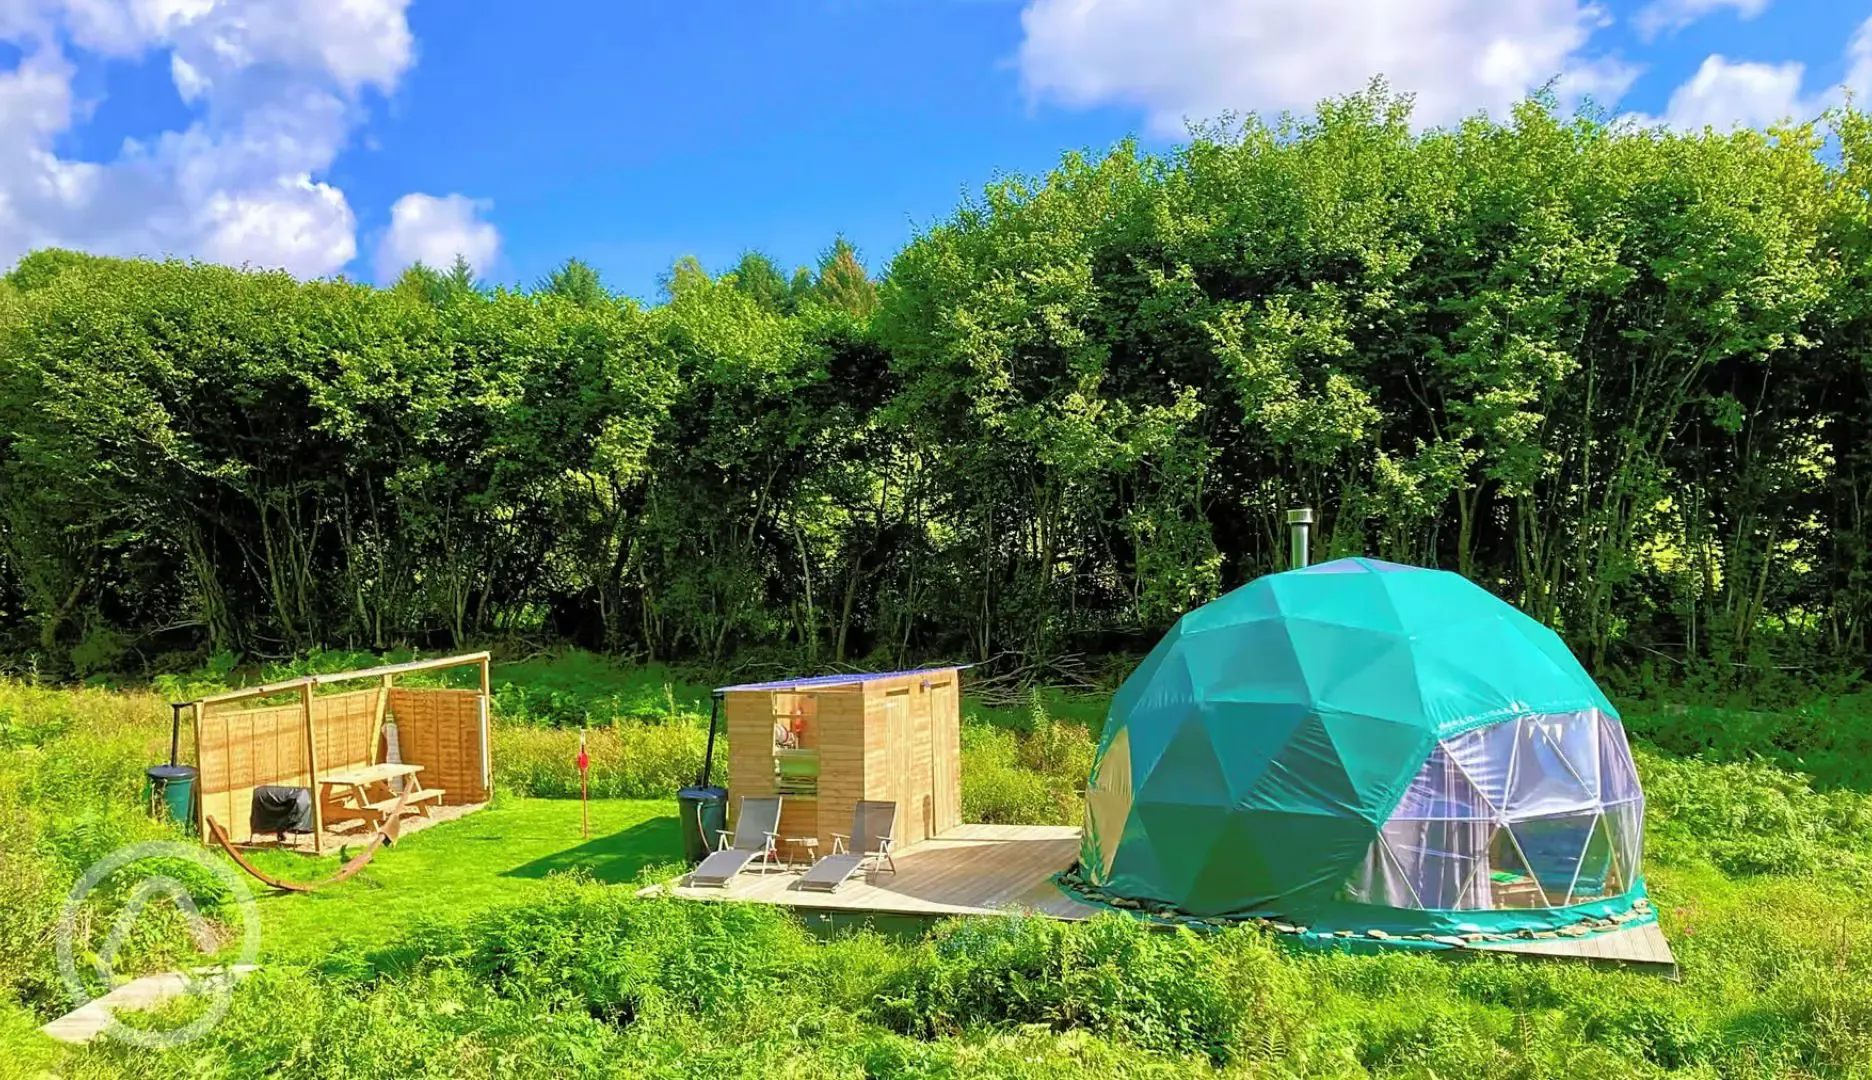 Glamping dome